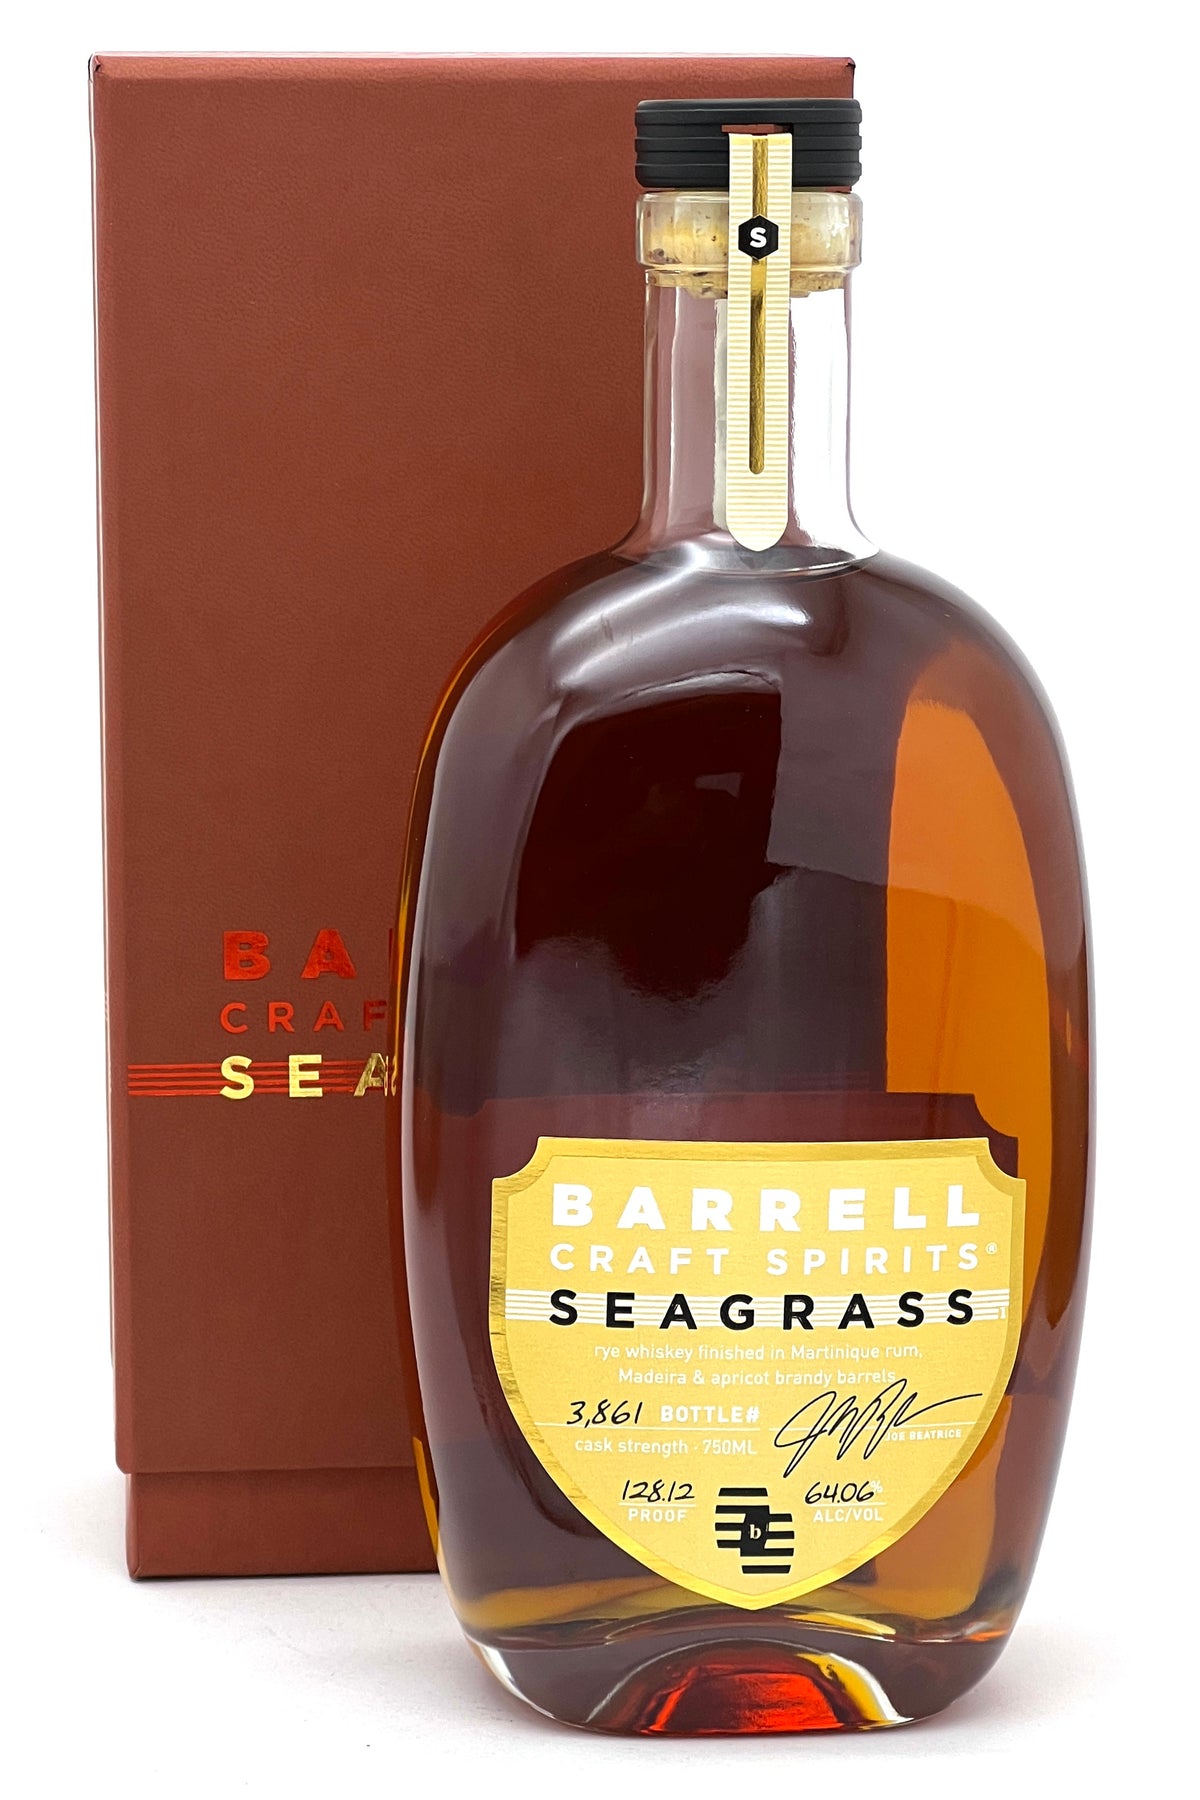 Barrell Gold Label Seagrass Rye Whiskey